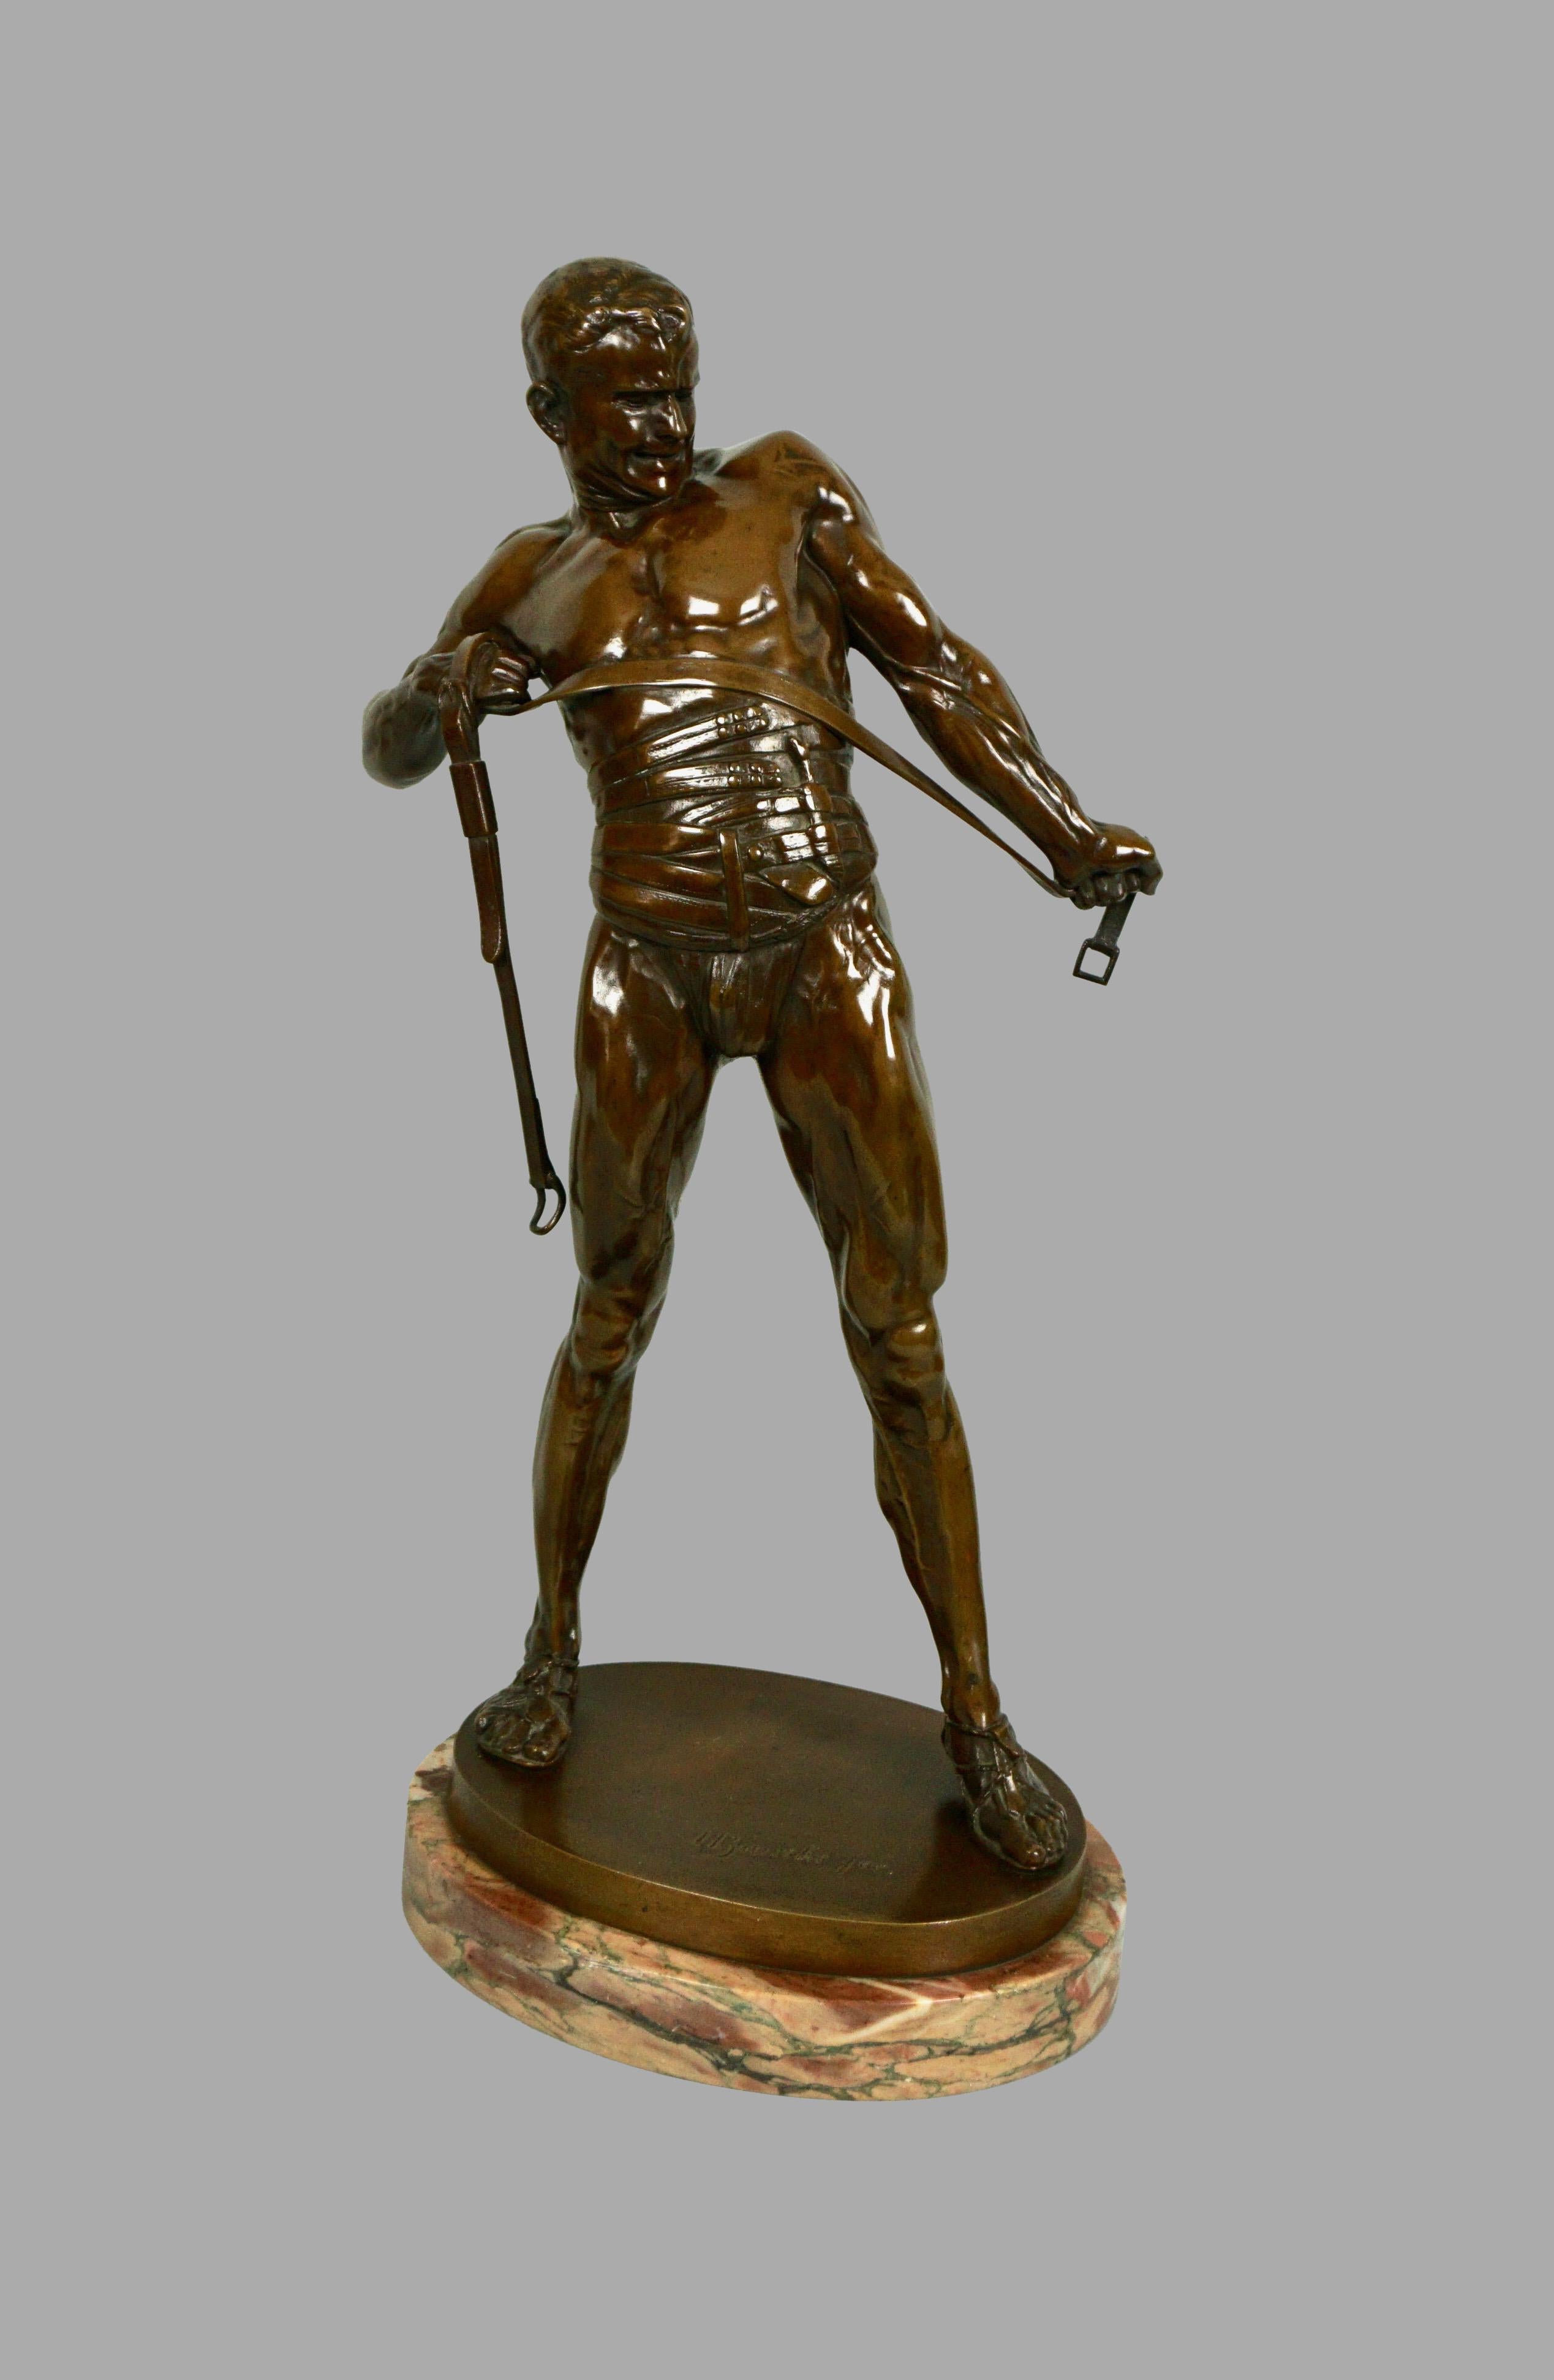 A dramatic and very well-cast bronze figure of a gladiator by Karl Friedrich Baucke, an accomplished sculptor who studied under Karl Janssen at the Dusseldorf Academy of Fine Arts from 1891-1900. In 1903 Baucke moved to Berlin and executed several